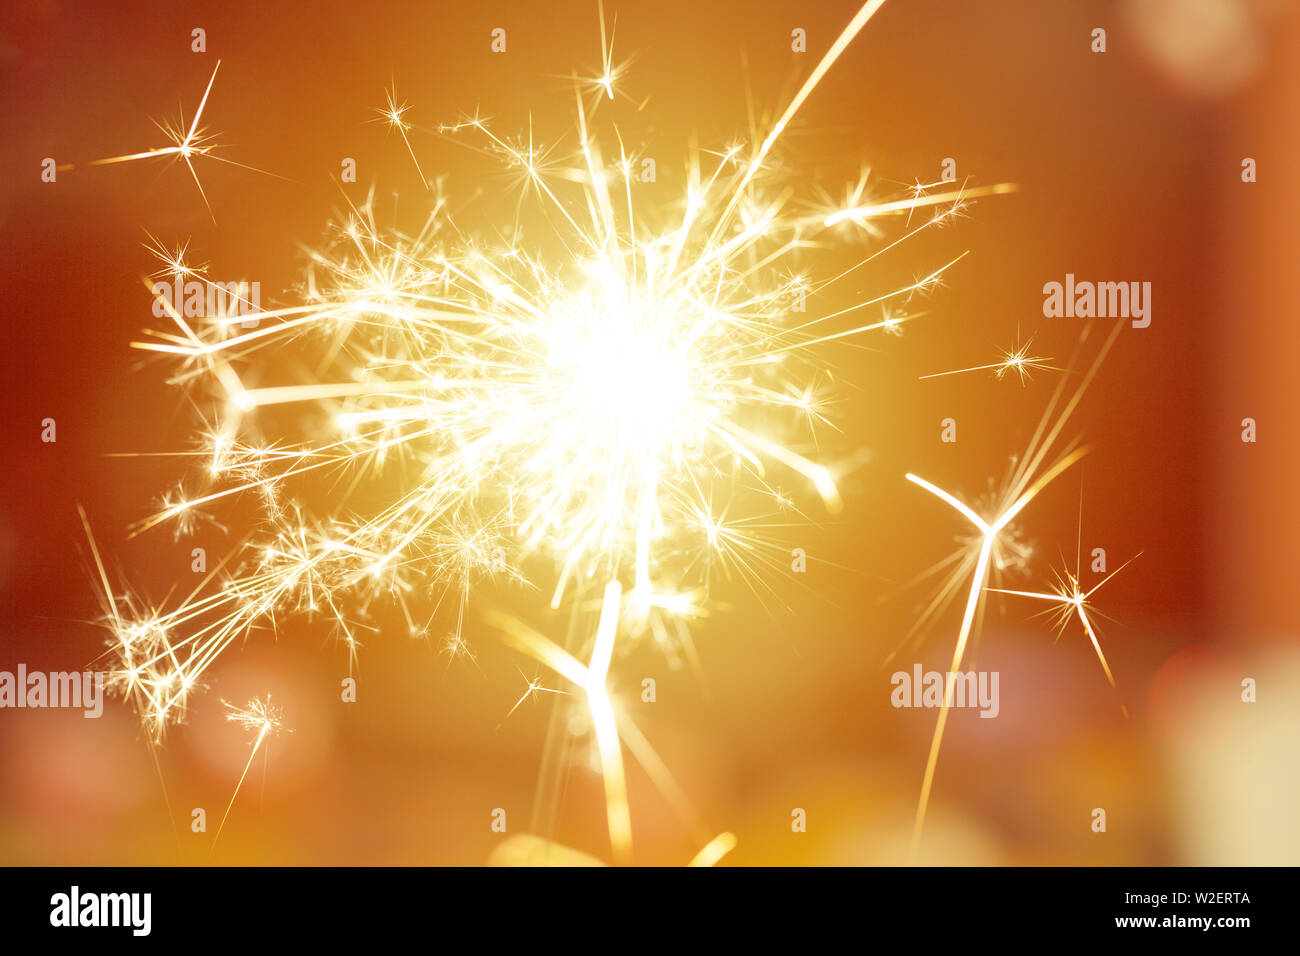 Sparks from hand cold fireworks bright sunspot background Stock Photo